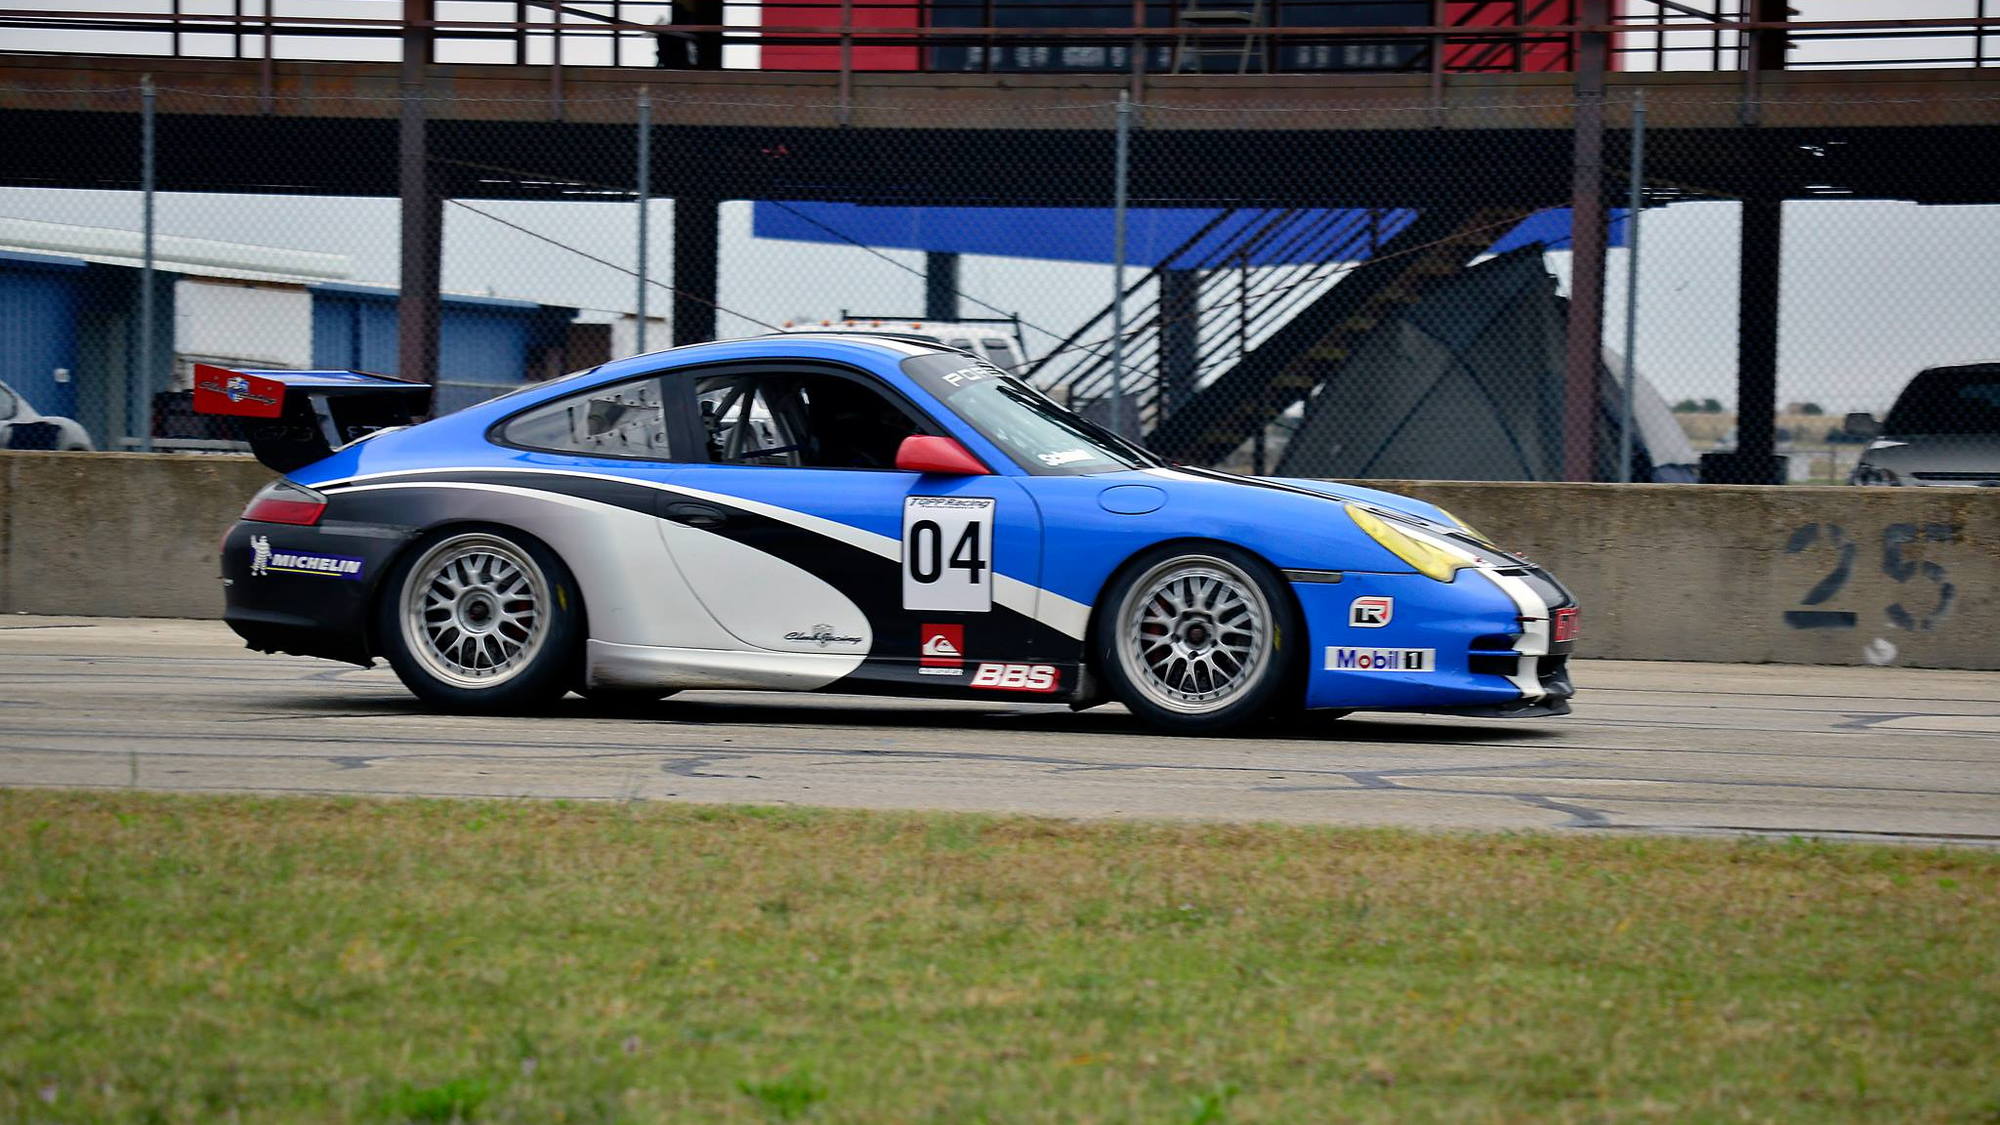 Luke Oxner will race this Porsche 911 GT3 Cup in 2014 PCA Enduro competition